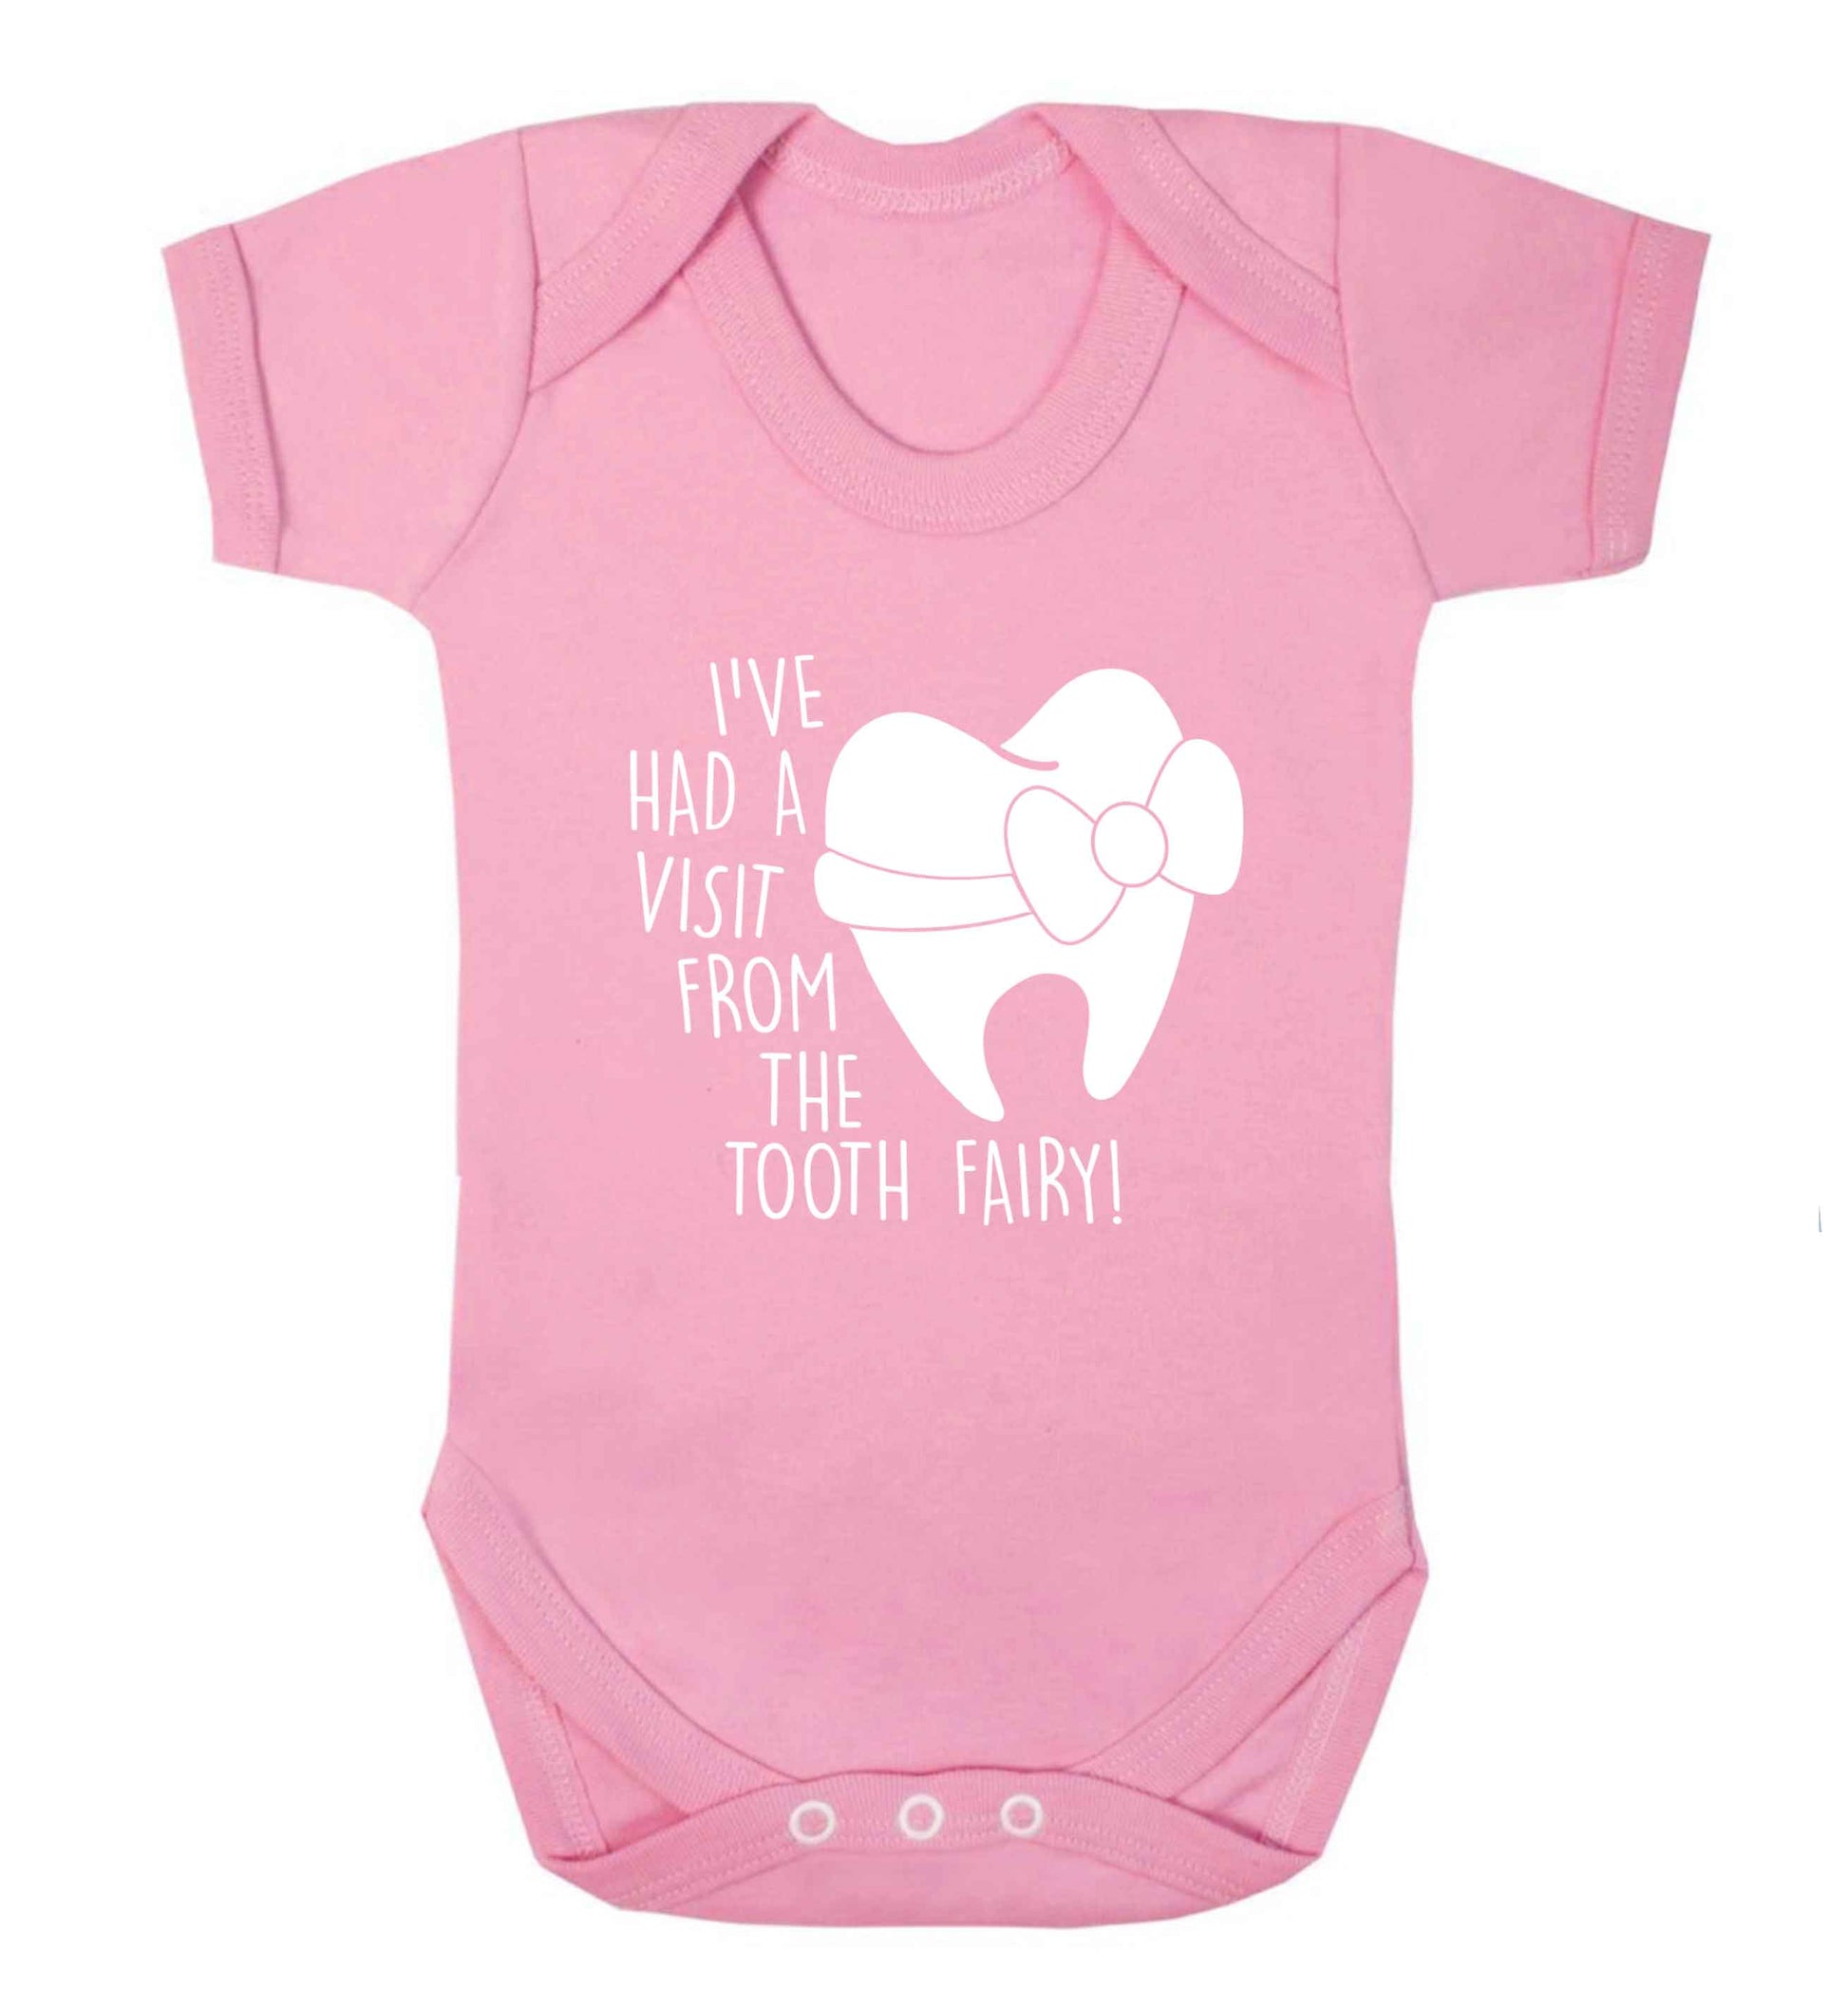 Visit From Tooth Fairy baby vest pale pink 18-24 months